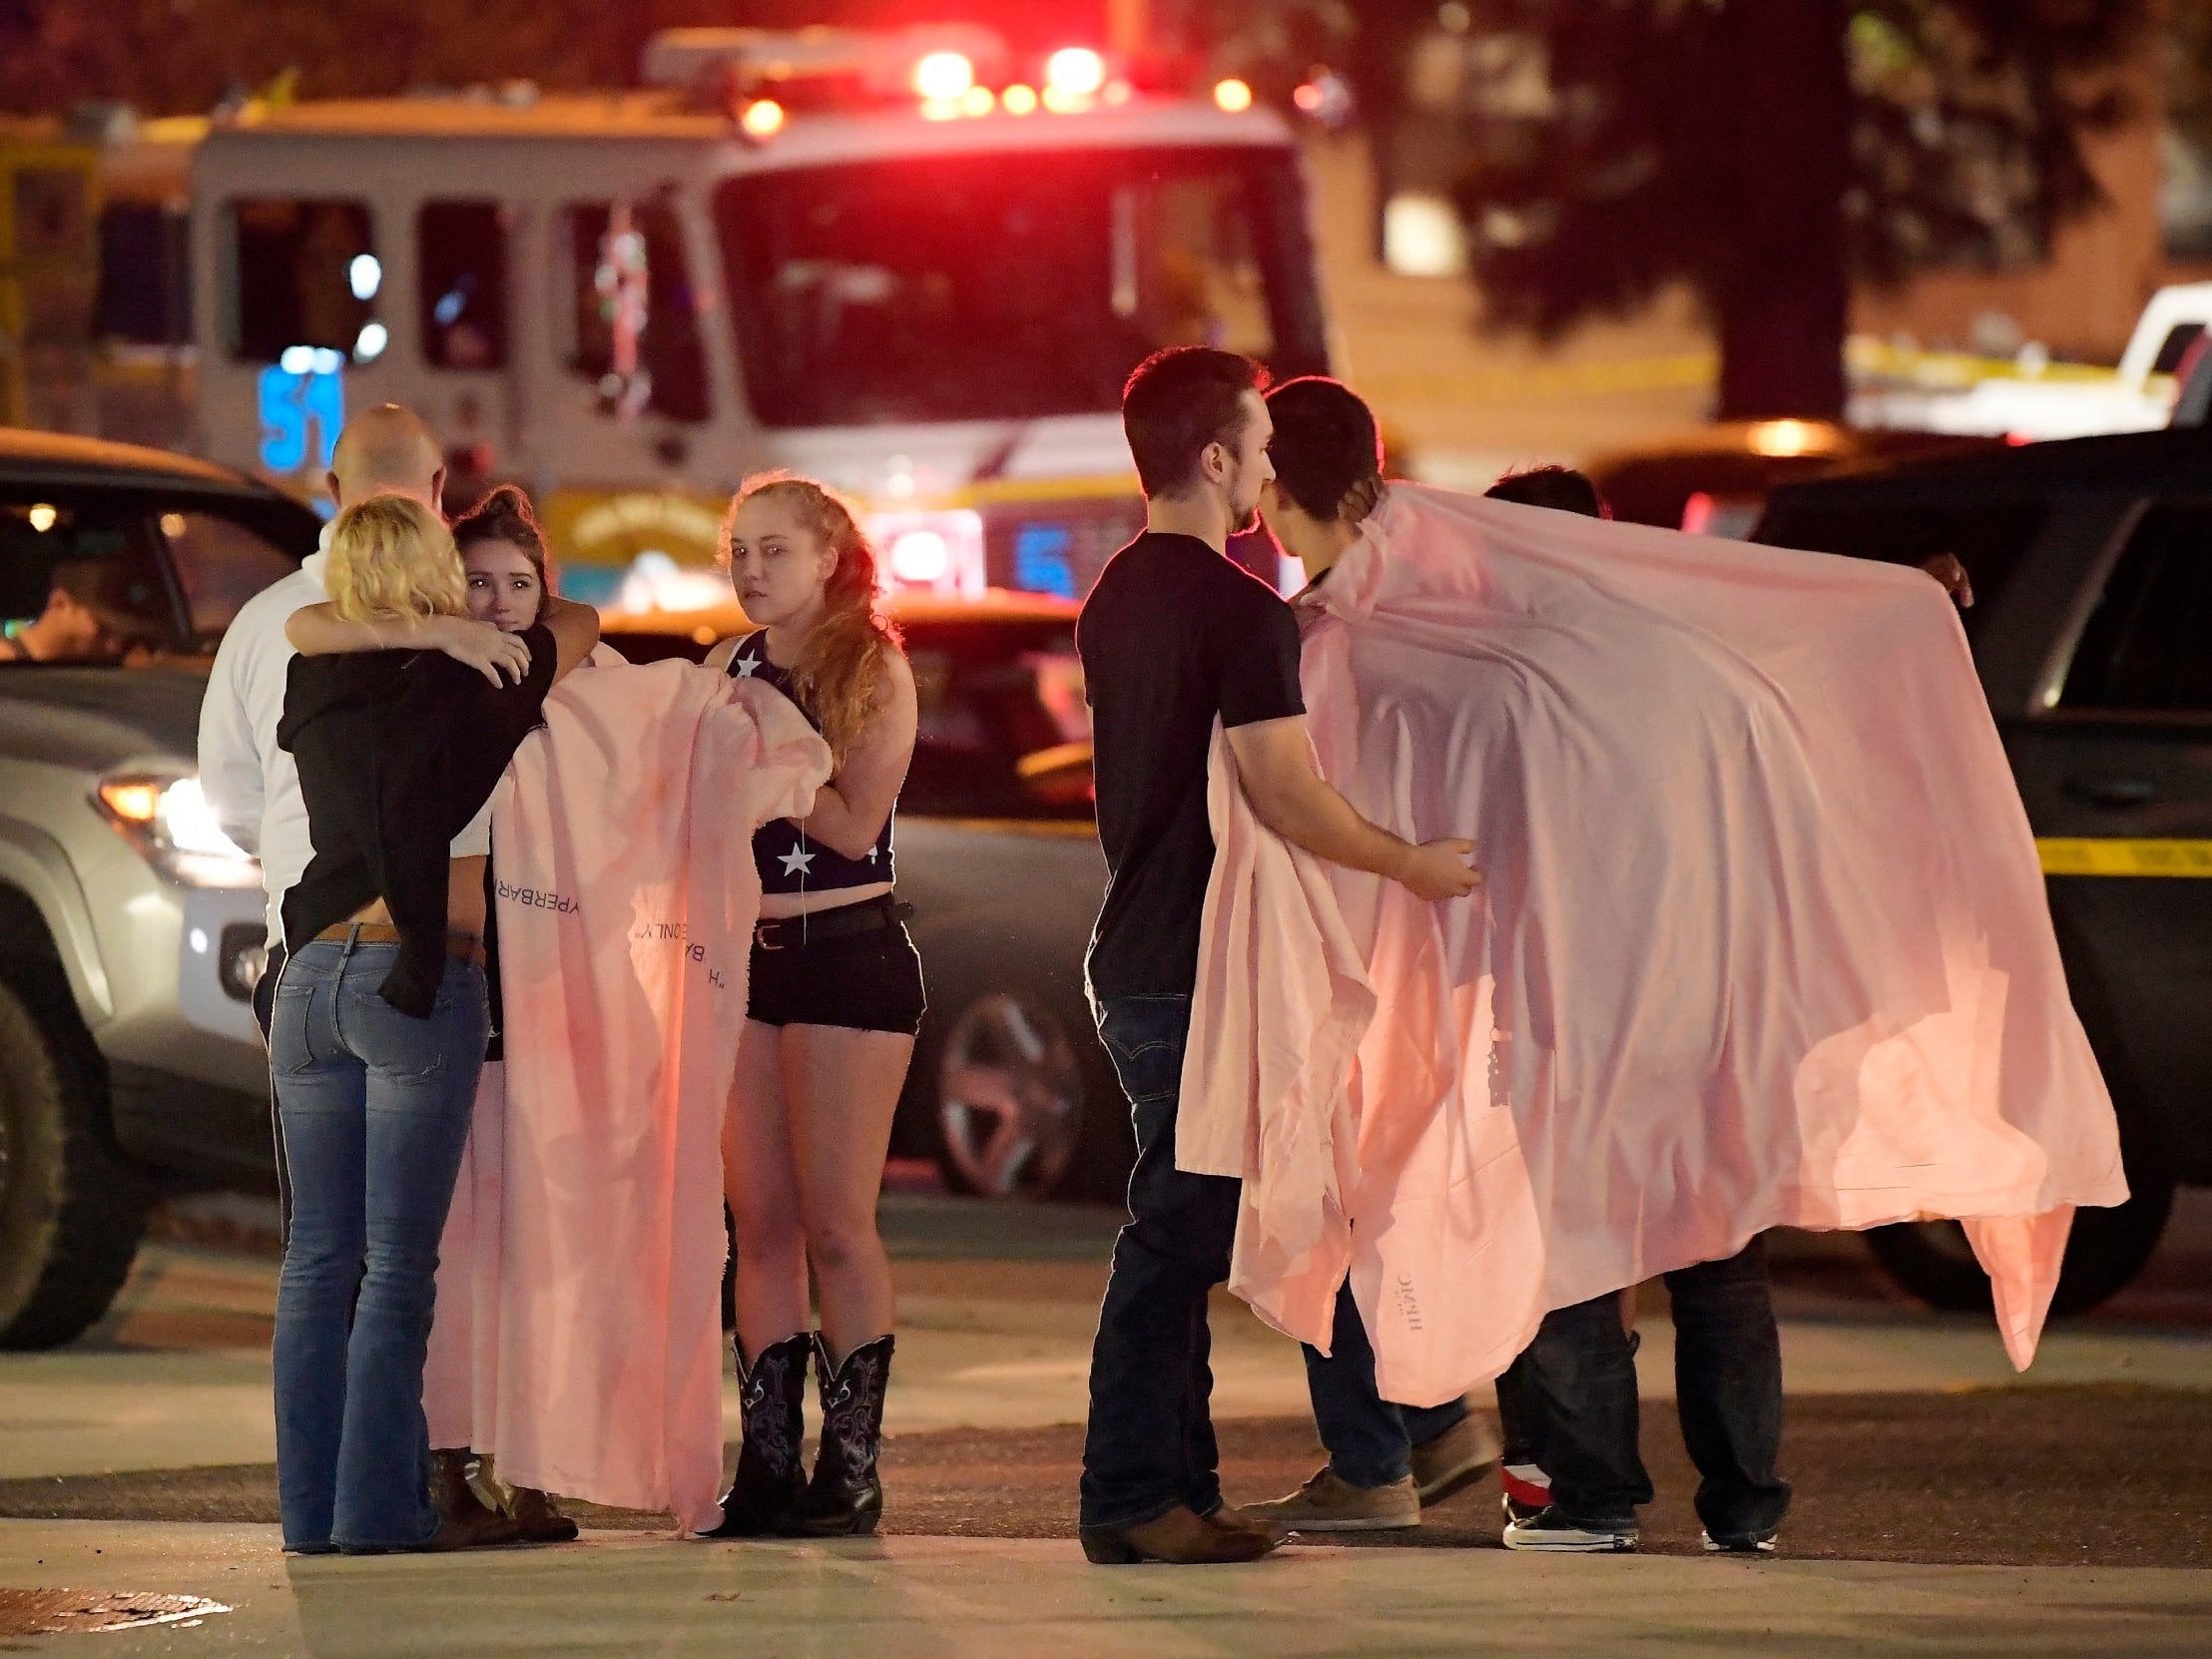 People comfort each other as they stand near the scene 8 November, 2018, in Thousand Oaks, California, where a gunman opened fire inside a country dance bar crowded with hundreds of people on "college night," killing 11 people including Sergeant Ron Helus, who rushed to the scene.